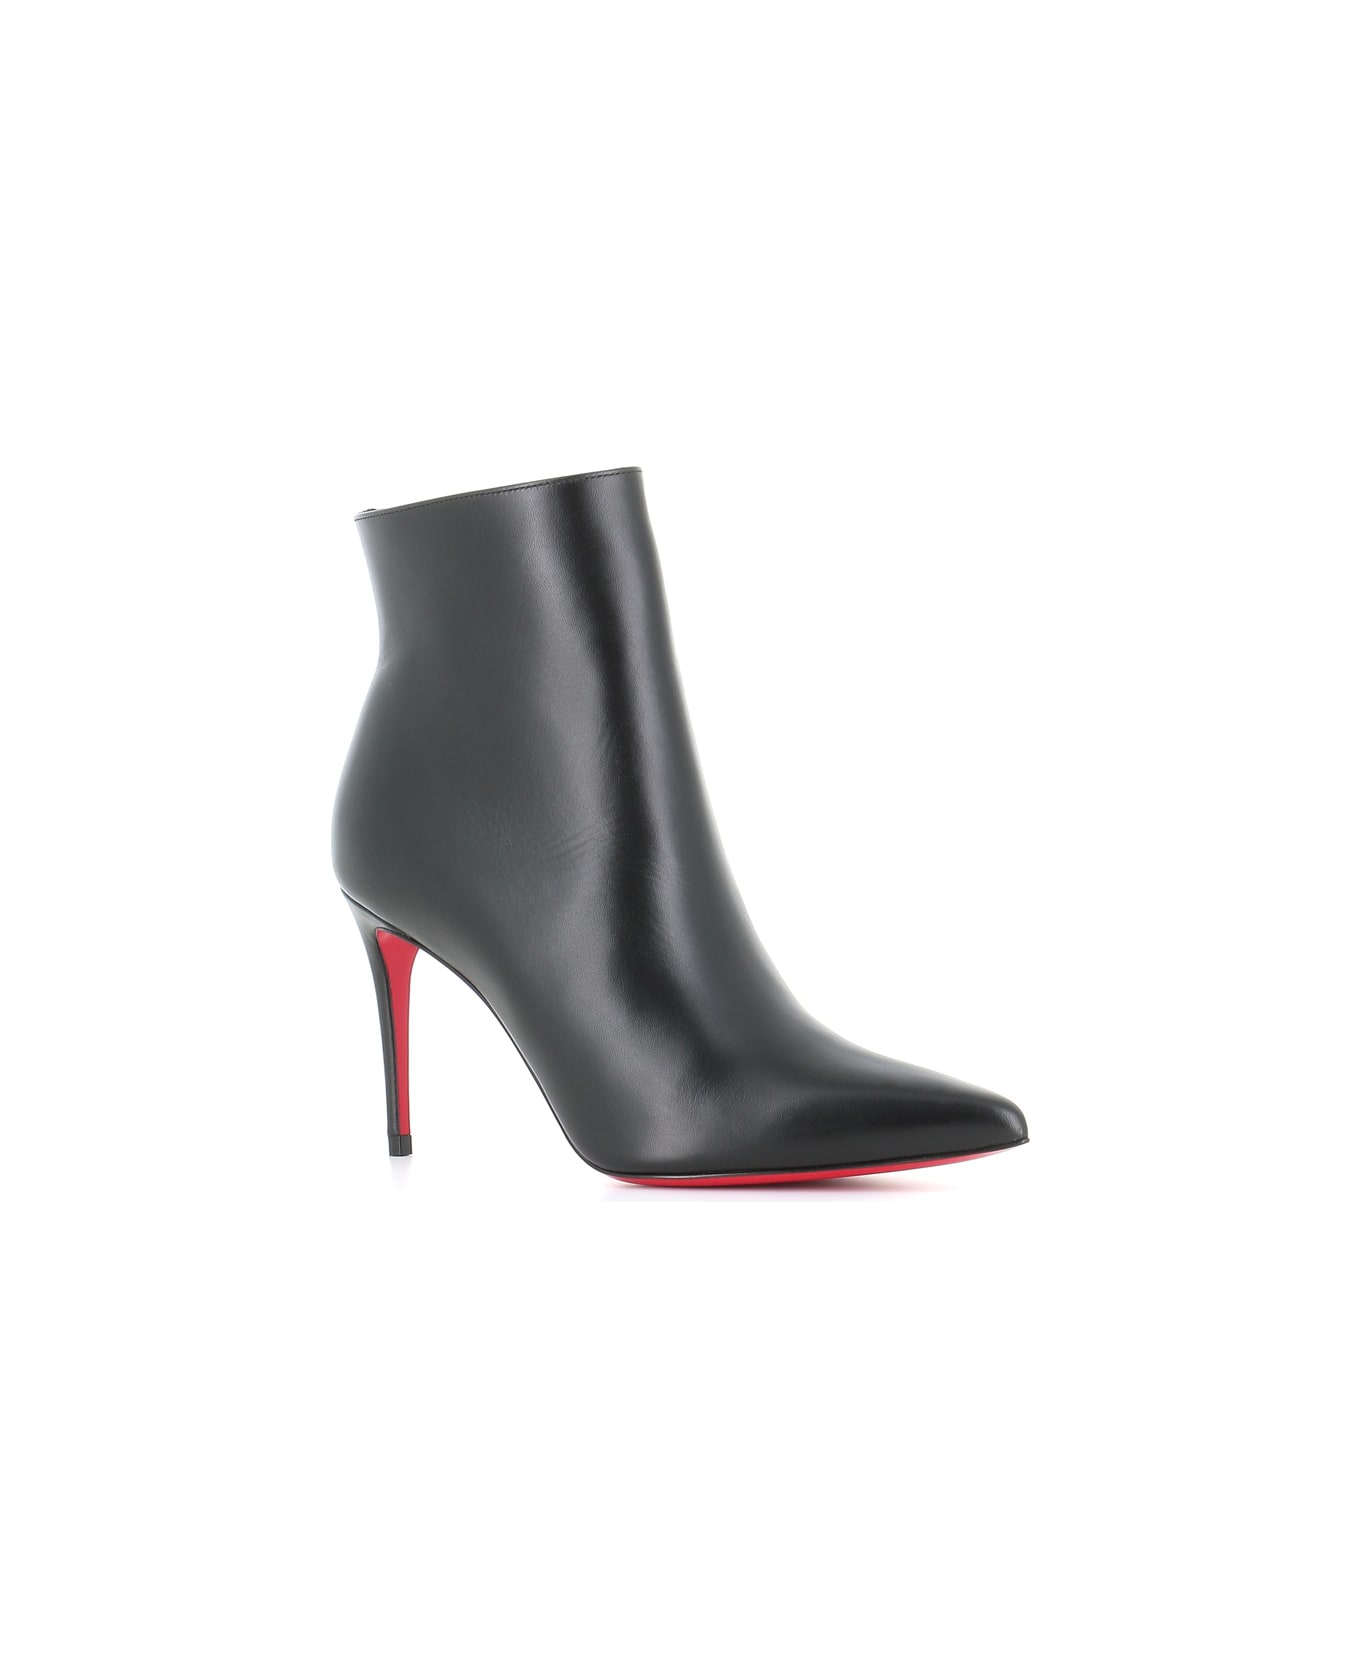 Christian Louboutin Ankle Boot So Kate Booty - Black